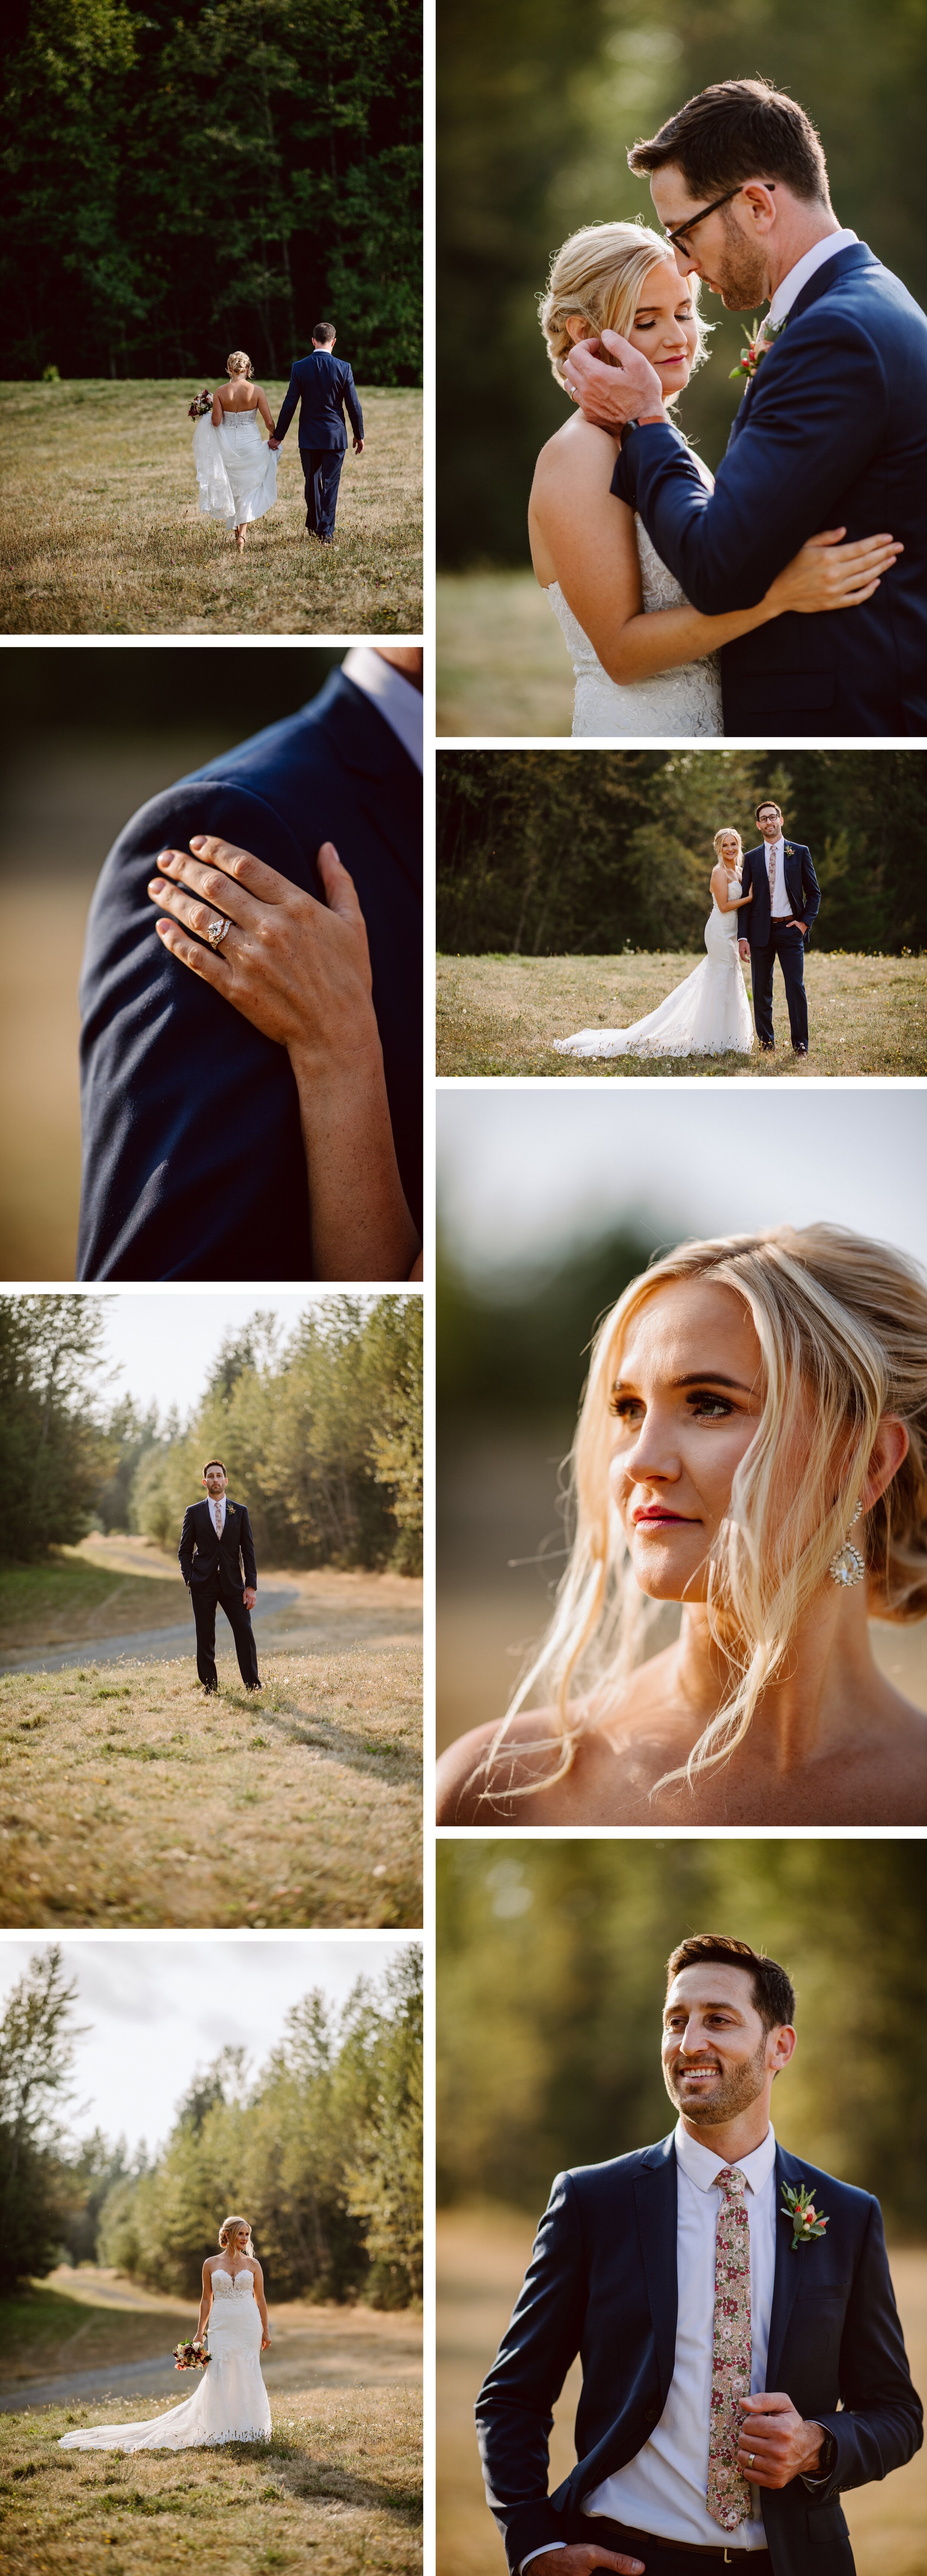 Couples sunset portraits of a bride in a structured lace dress and a groom in a navy colored suit after their wedding ceremony